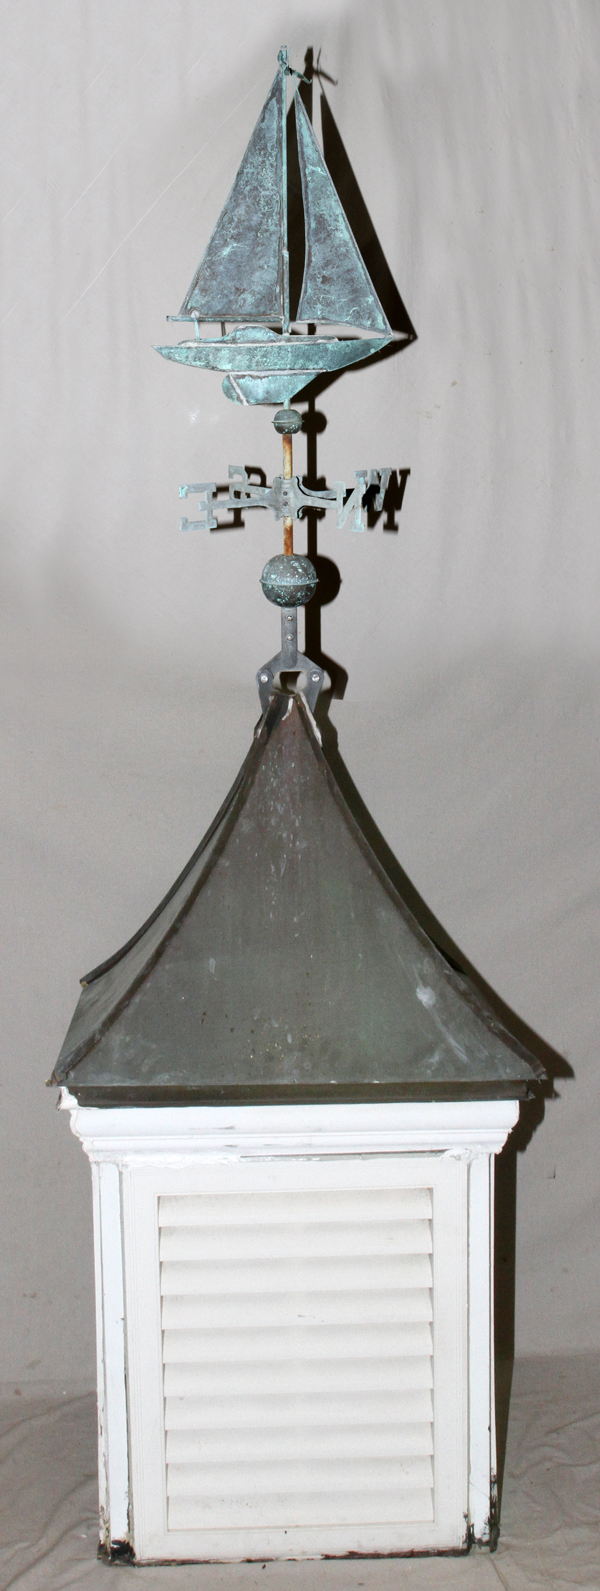 WEATHERVANE CUPOLA WITH SAILBOAT, H 9`, L 27", D 27": white painted wood cupola with vented sides,